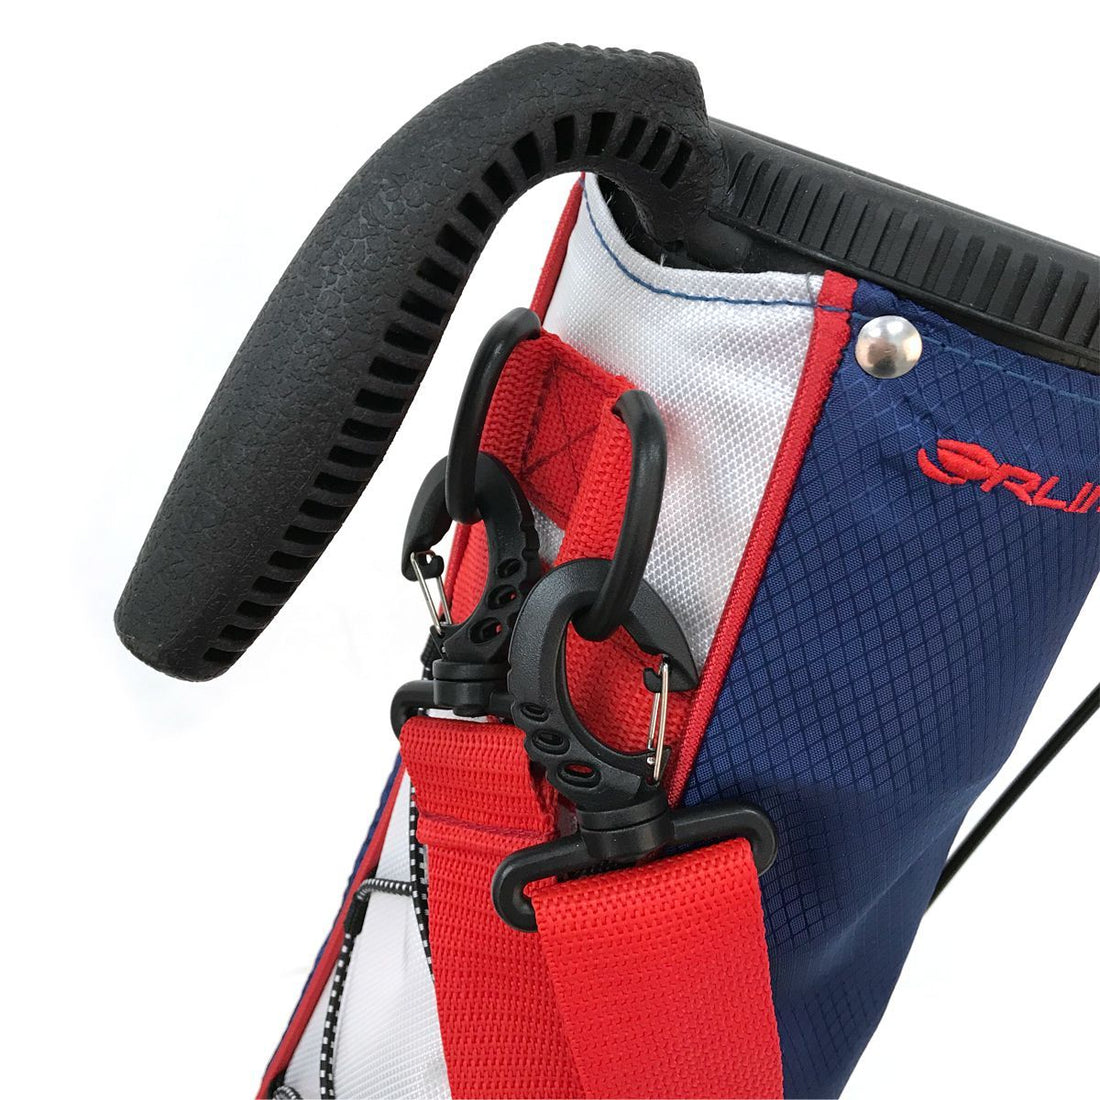 carry handle and shoulder strap clips on a red, white and blue Orlimar Pitch &